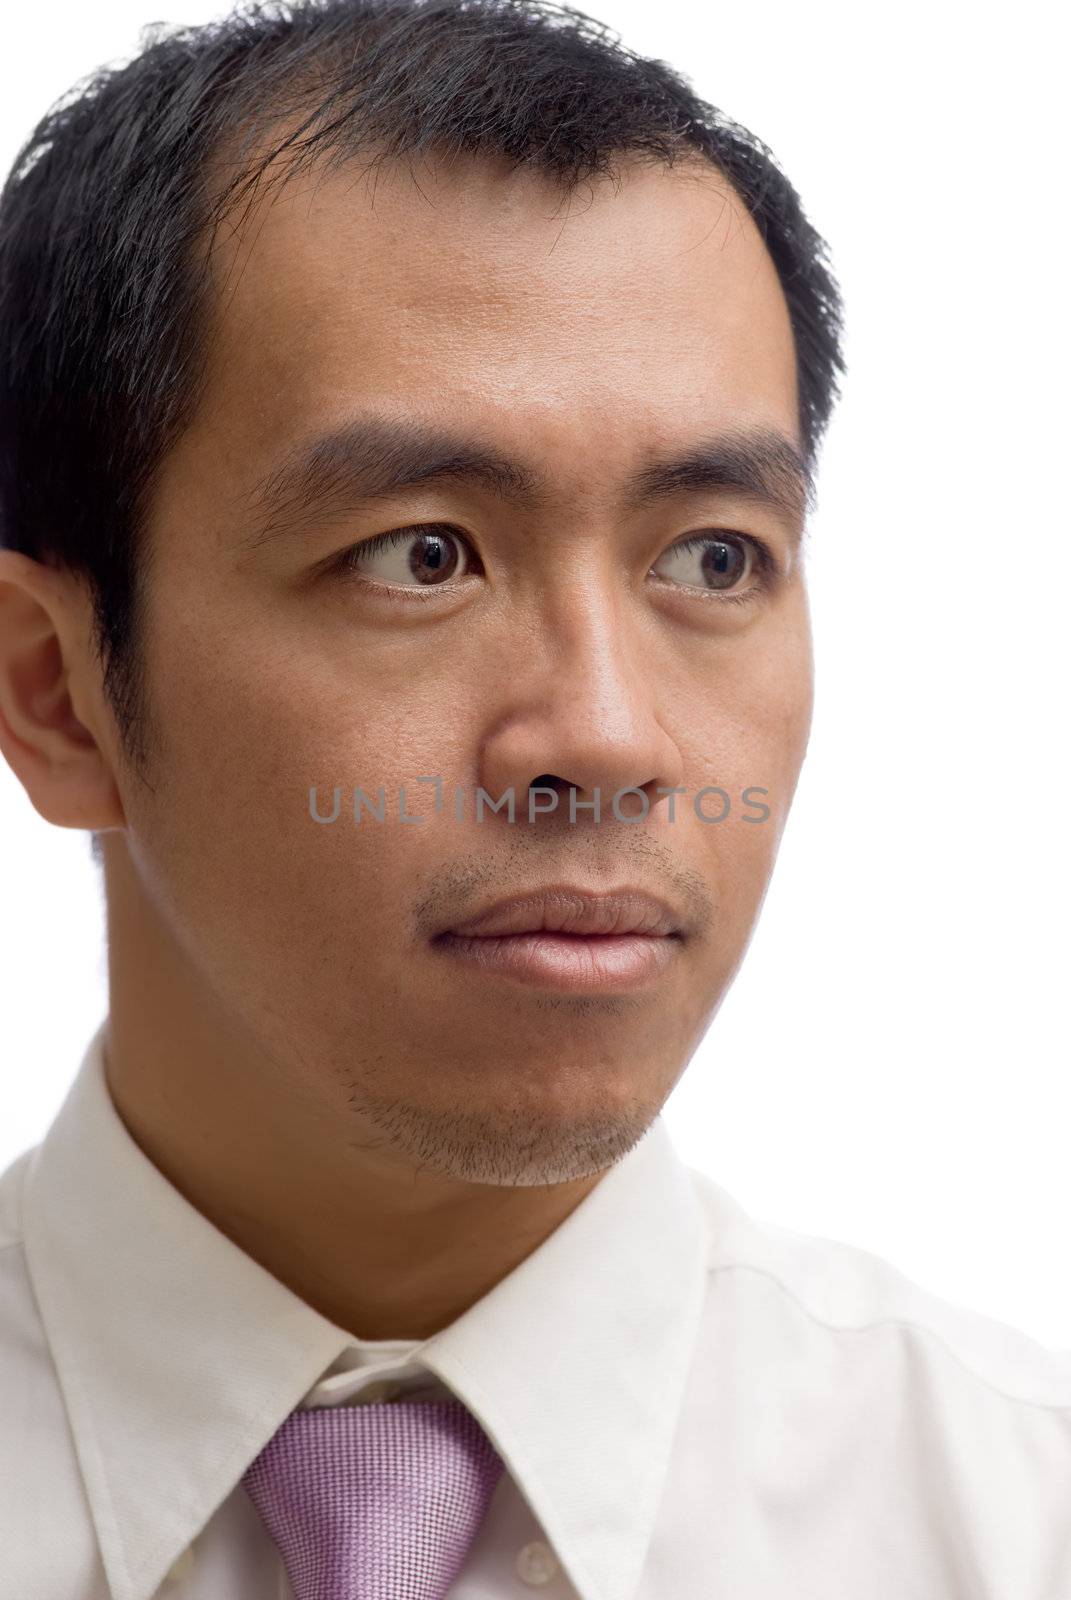 Success business man of Asian portrait on white background.